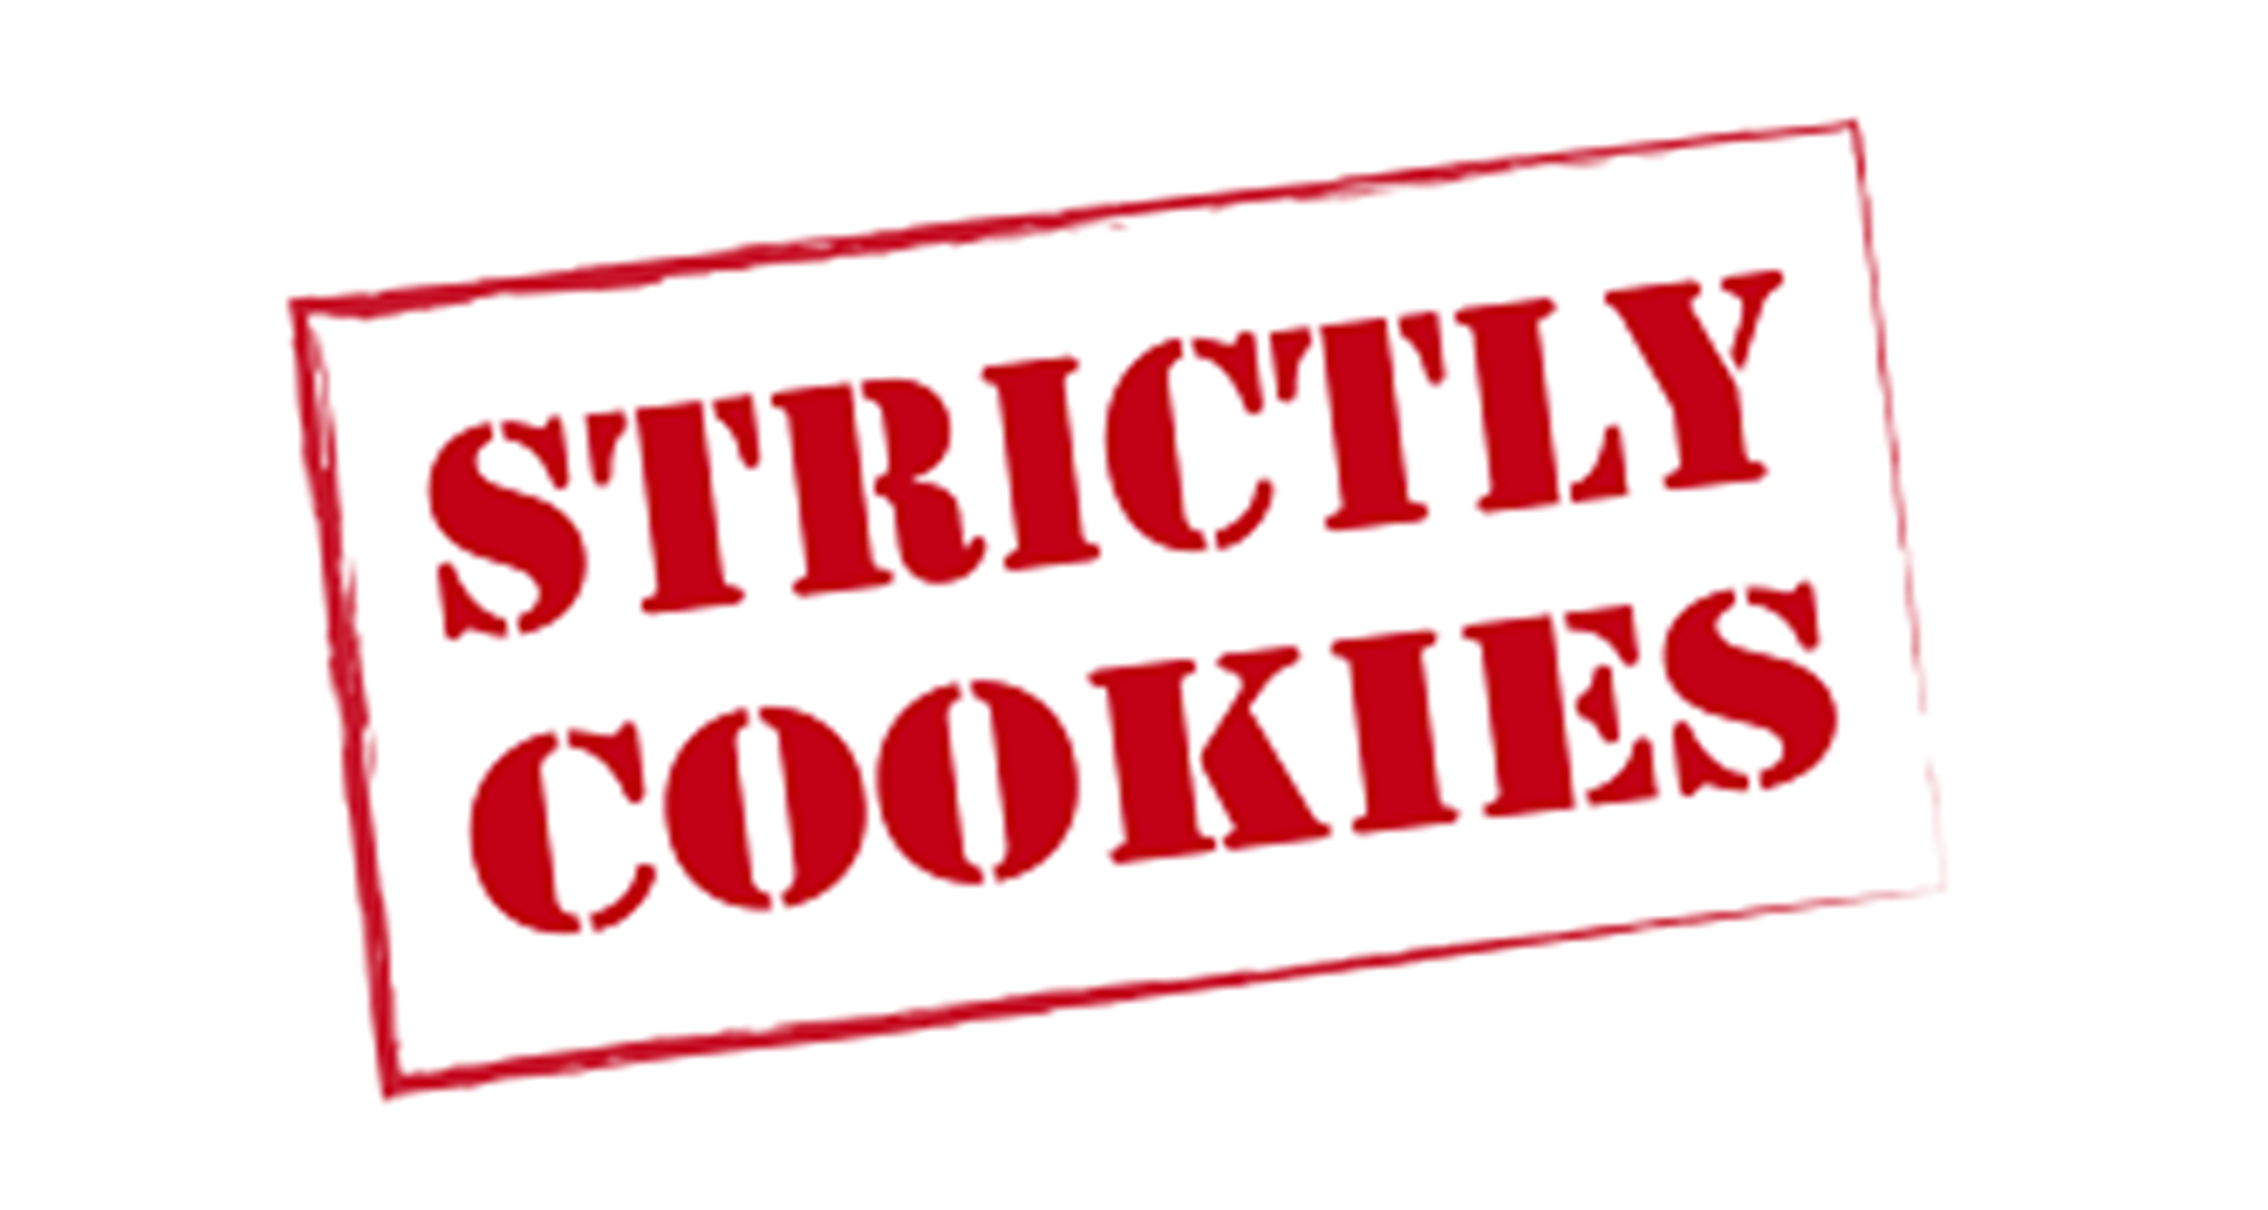 STRICTLY COOKIES